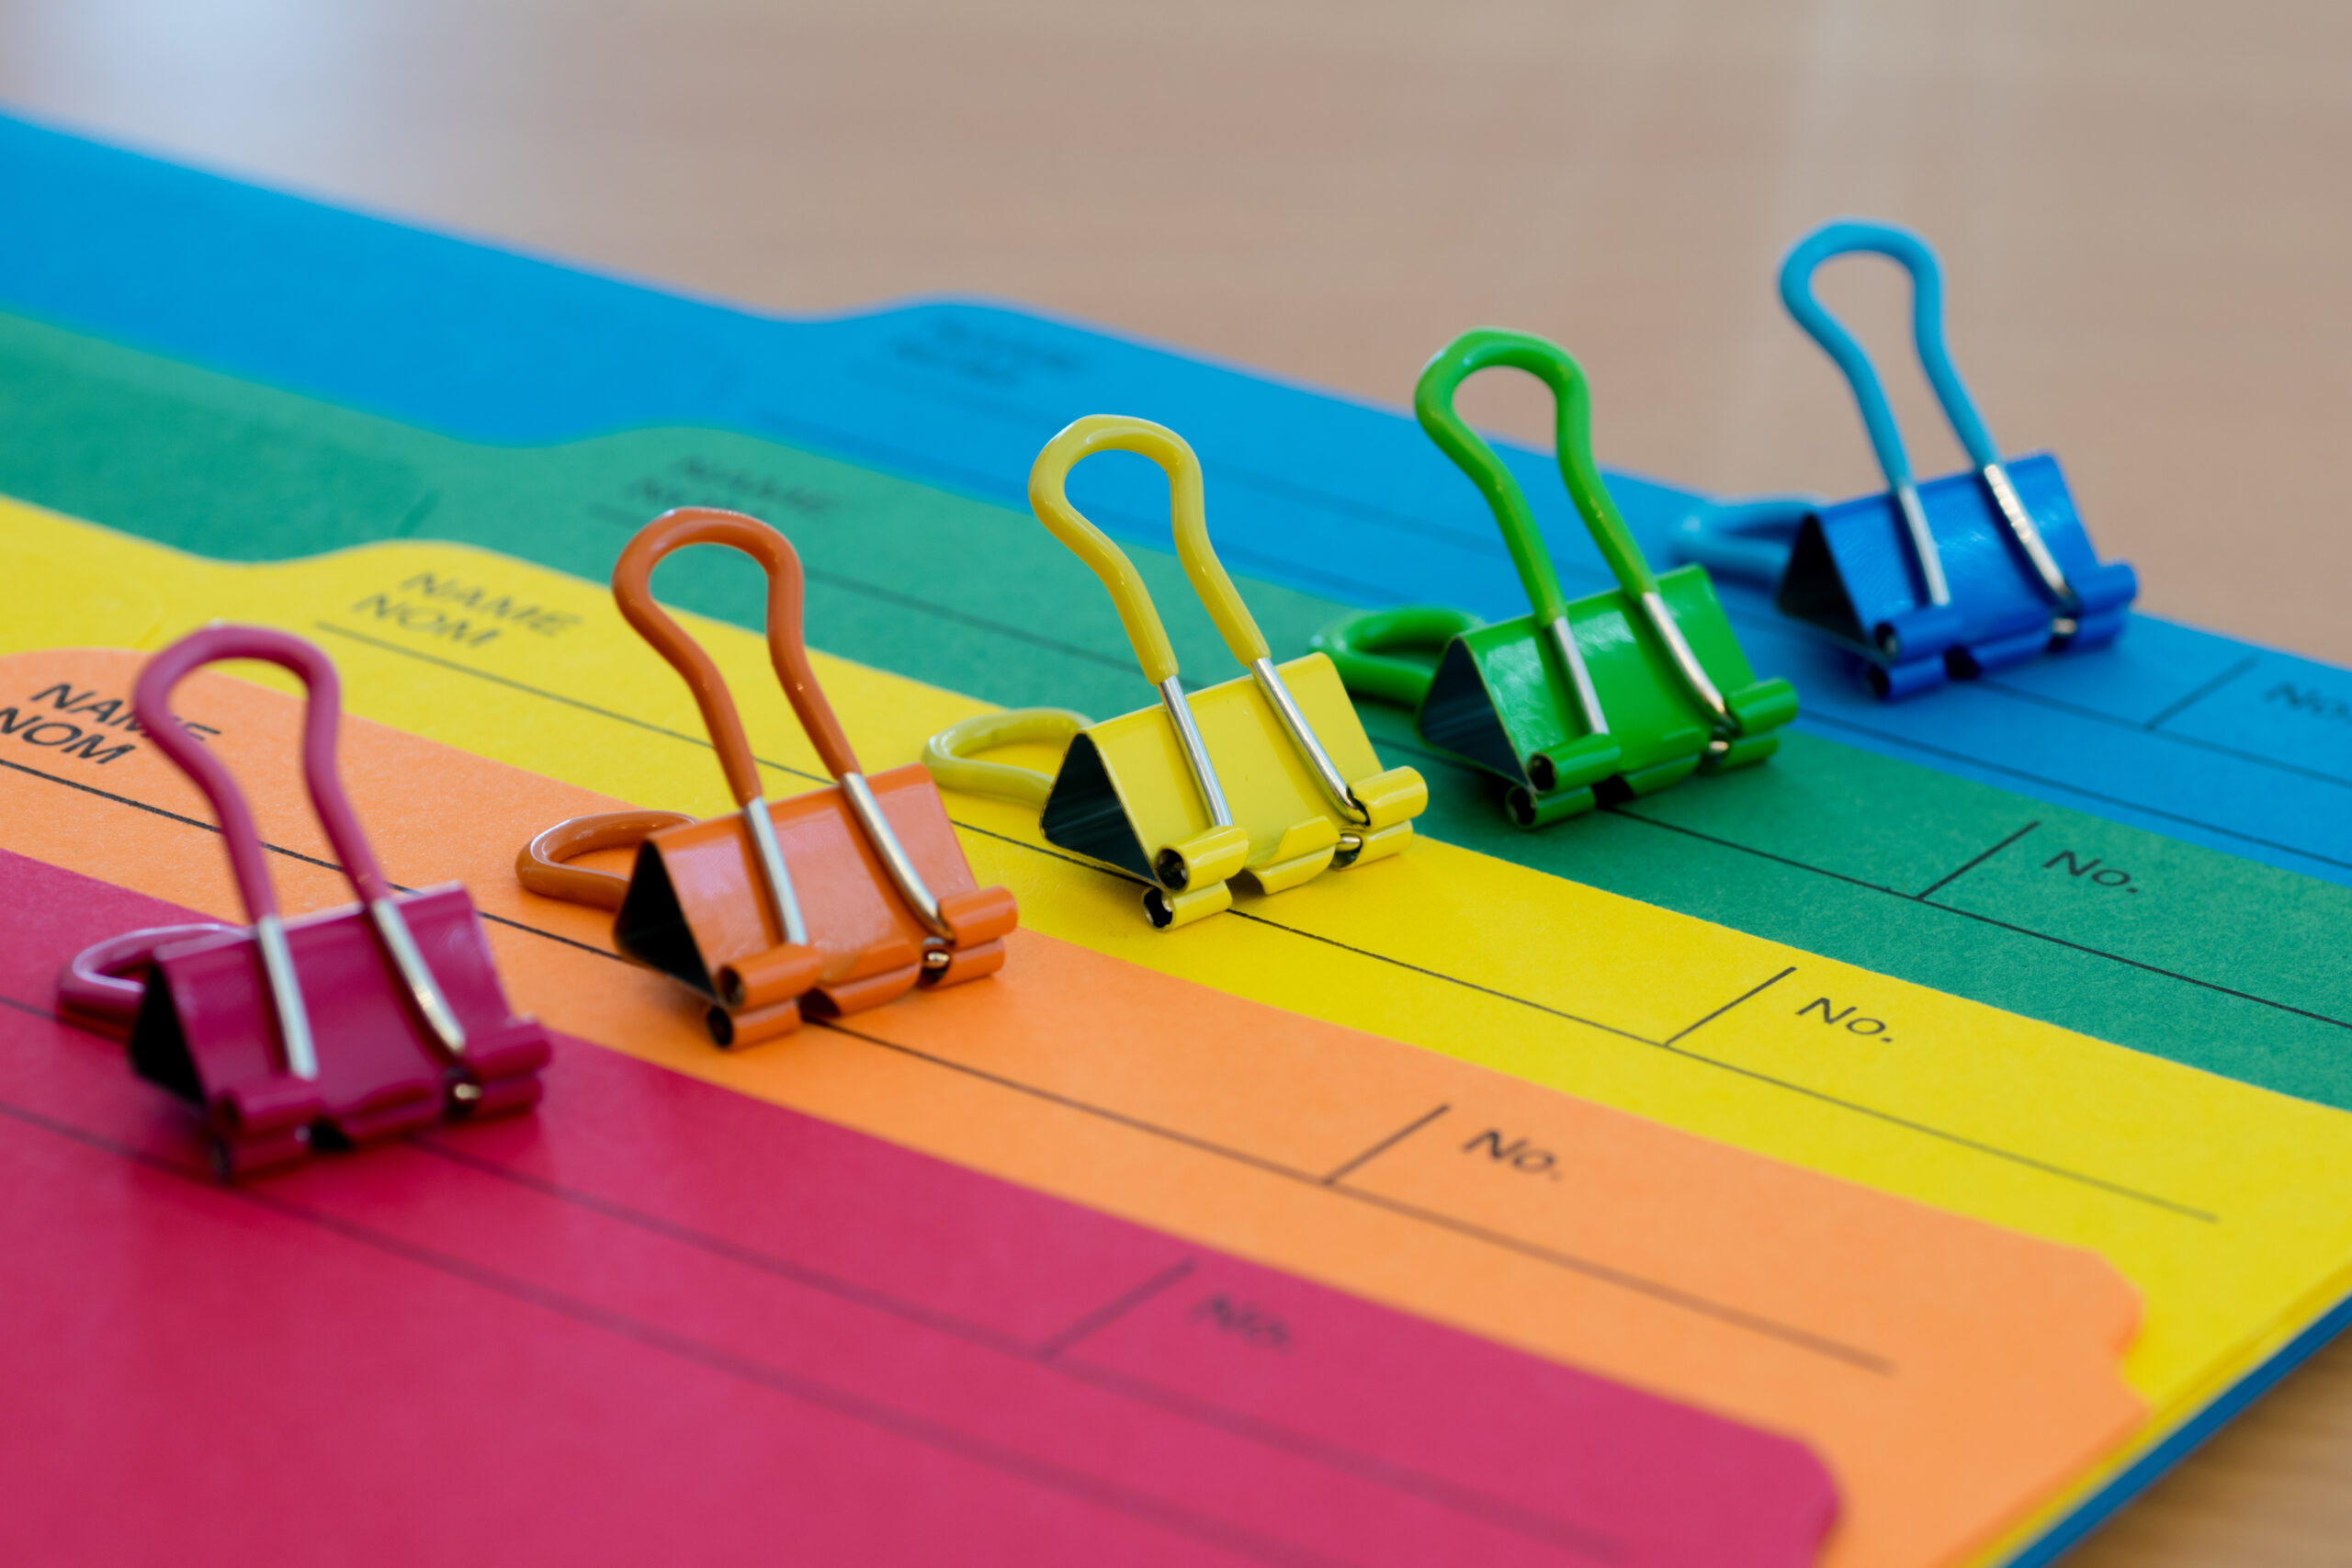 Five brightly-colored file folders and coordinating paper clips are laid out diagonally, forming a rainbow from red, orange, yellow, green and blue